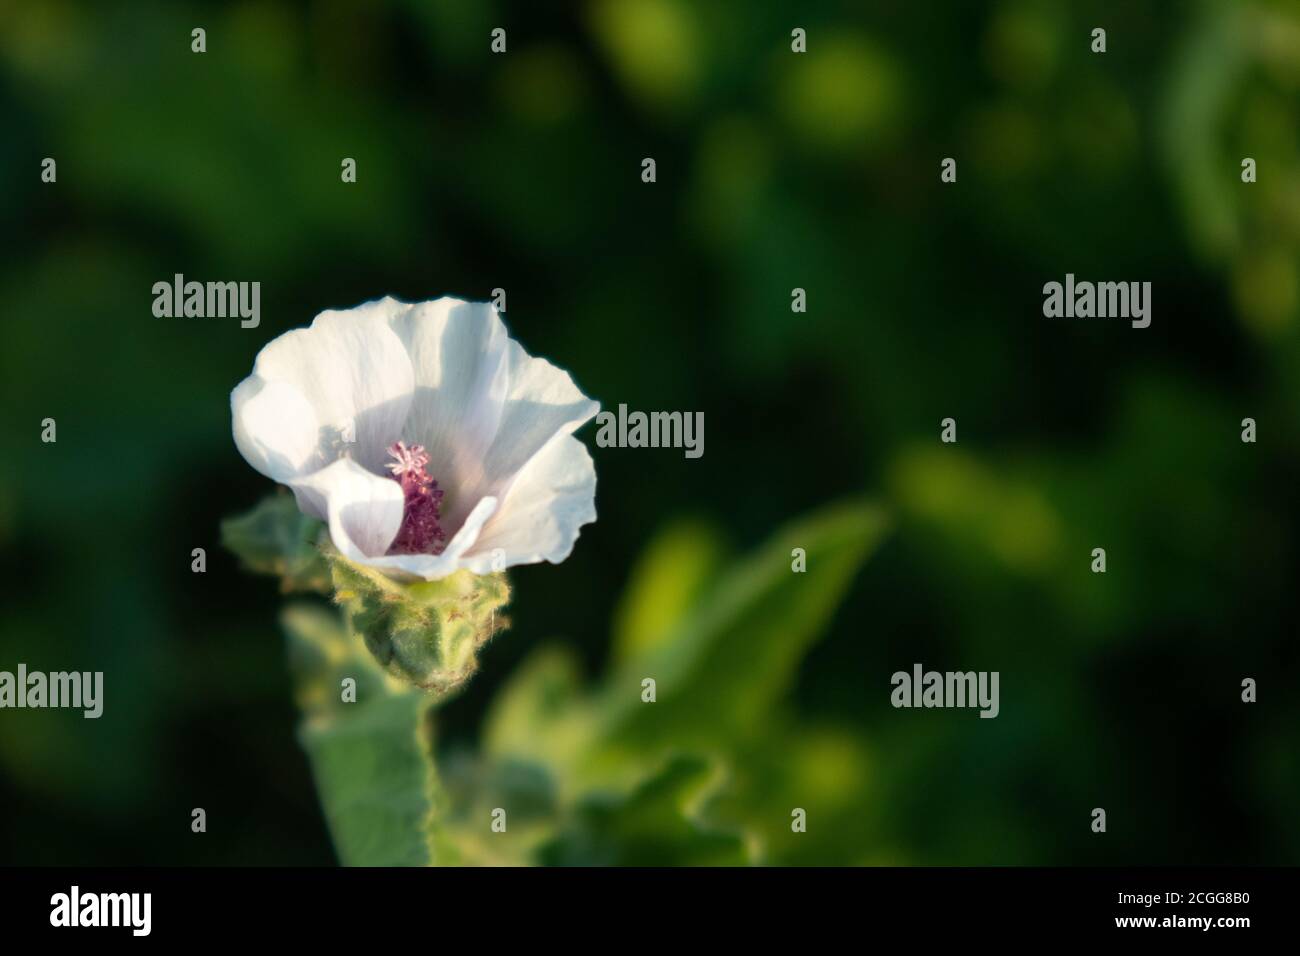 Althaea officinalis, or marsh-mallow, family Malvaceae. Pale pink tender flower with leaves in vibrant dark greenery background Stock Photo